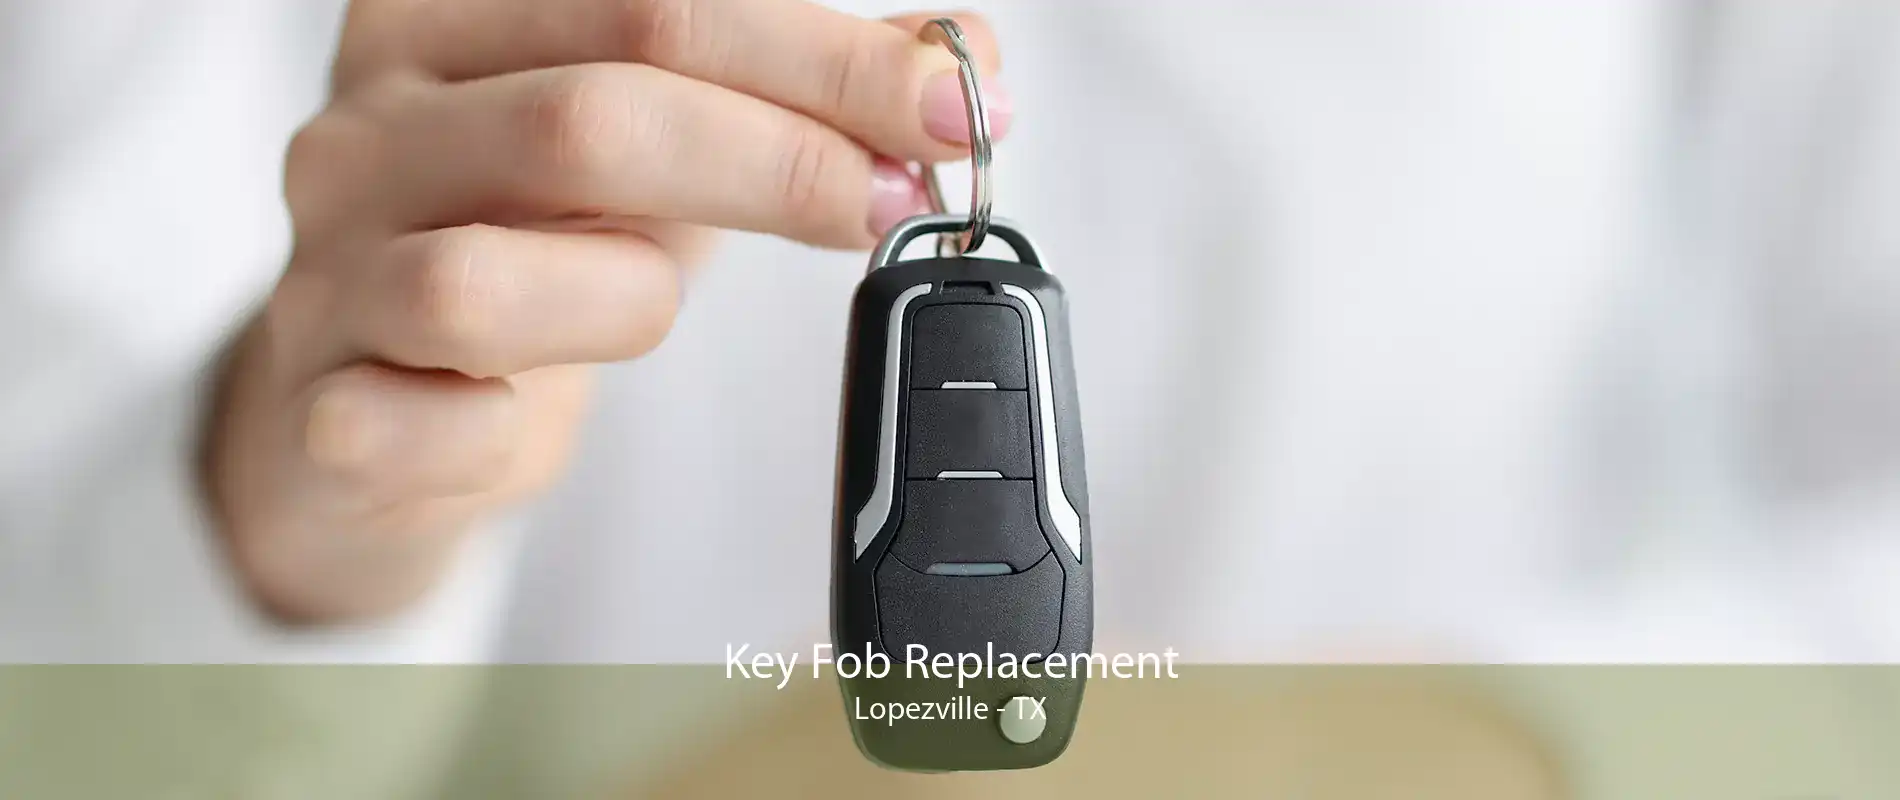 Key Fob Replacement Lopezville - TX